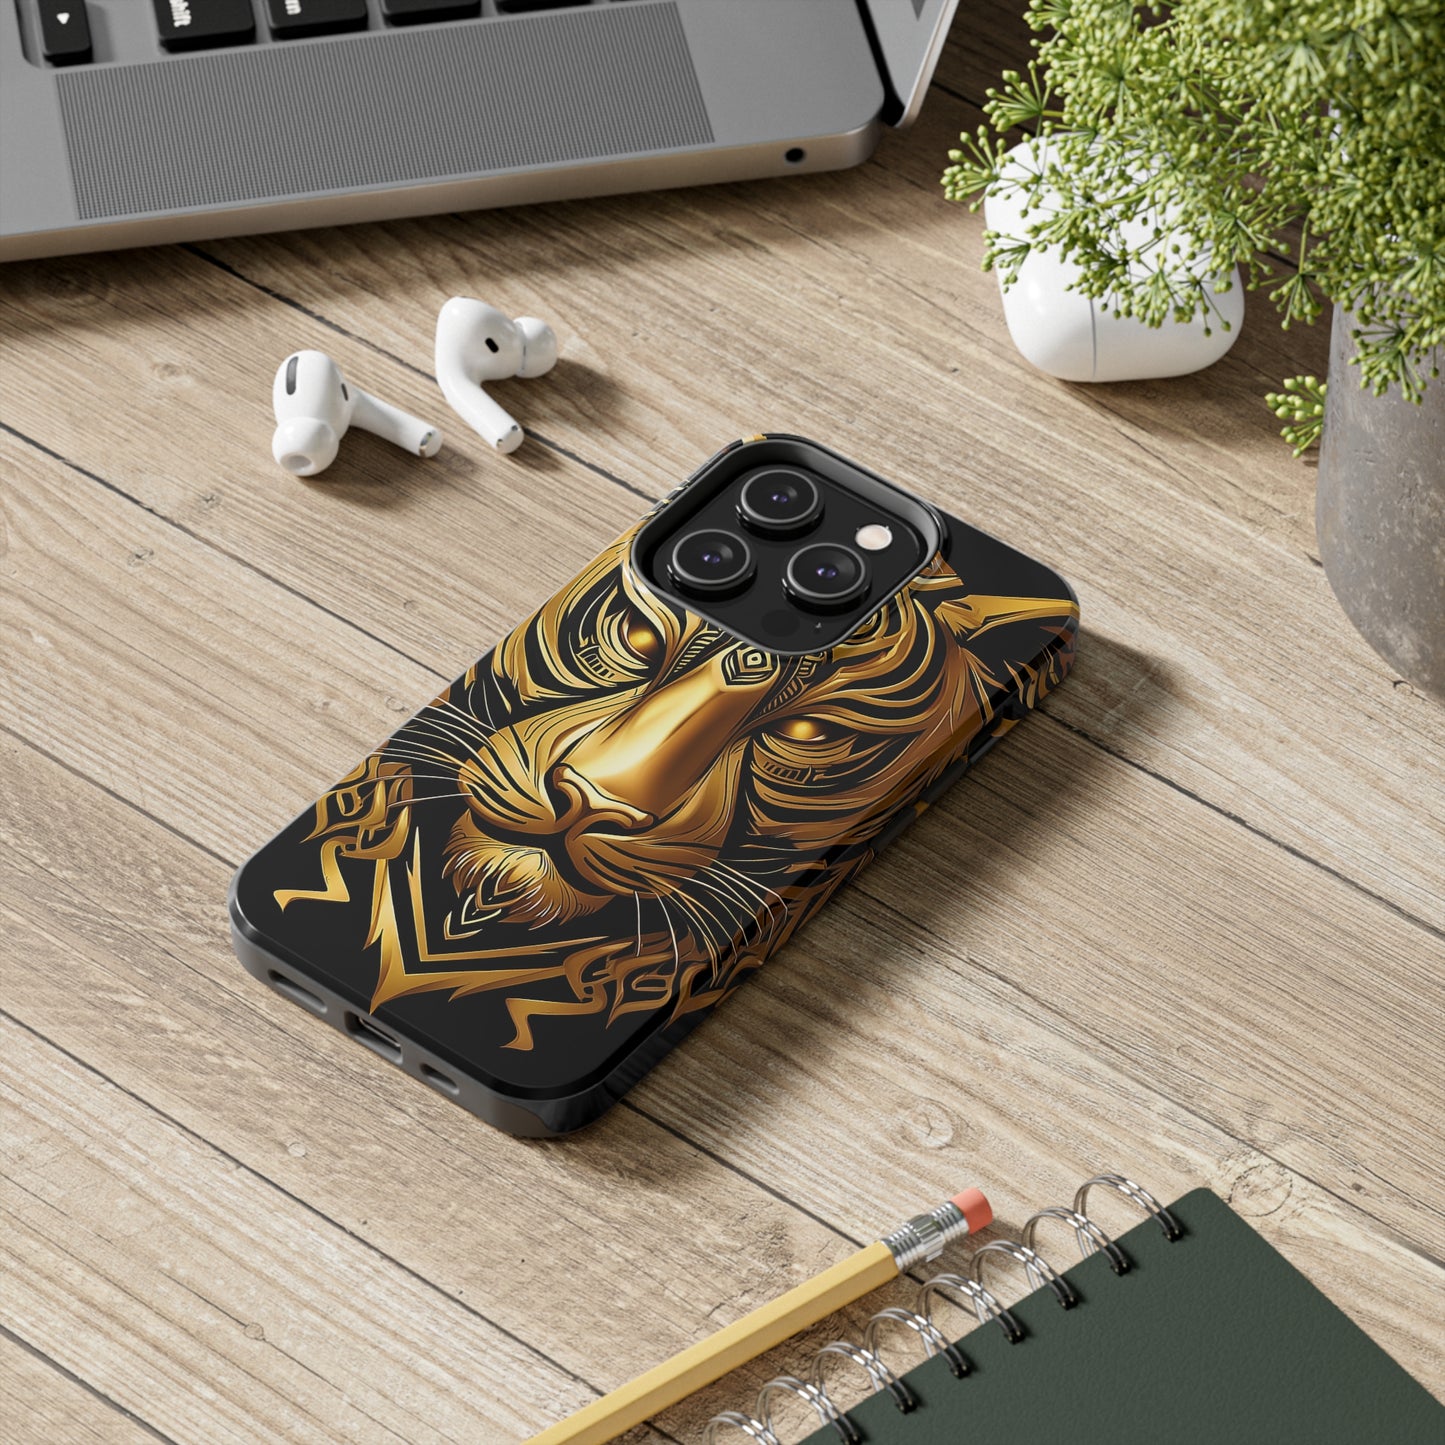 Big Cat Themed iPhone 14 Tough Case - Gold Tribal Tiger Head Printed on Phone Case for iPhone 14 Pro on desk